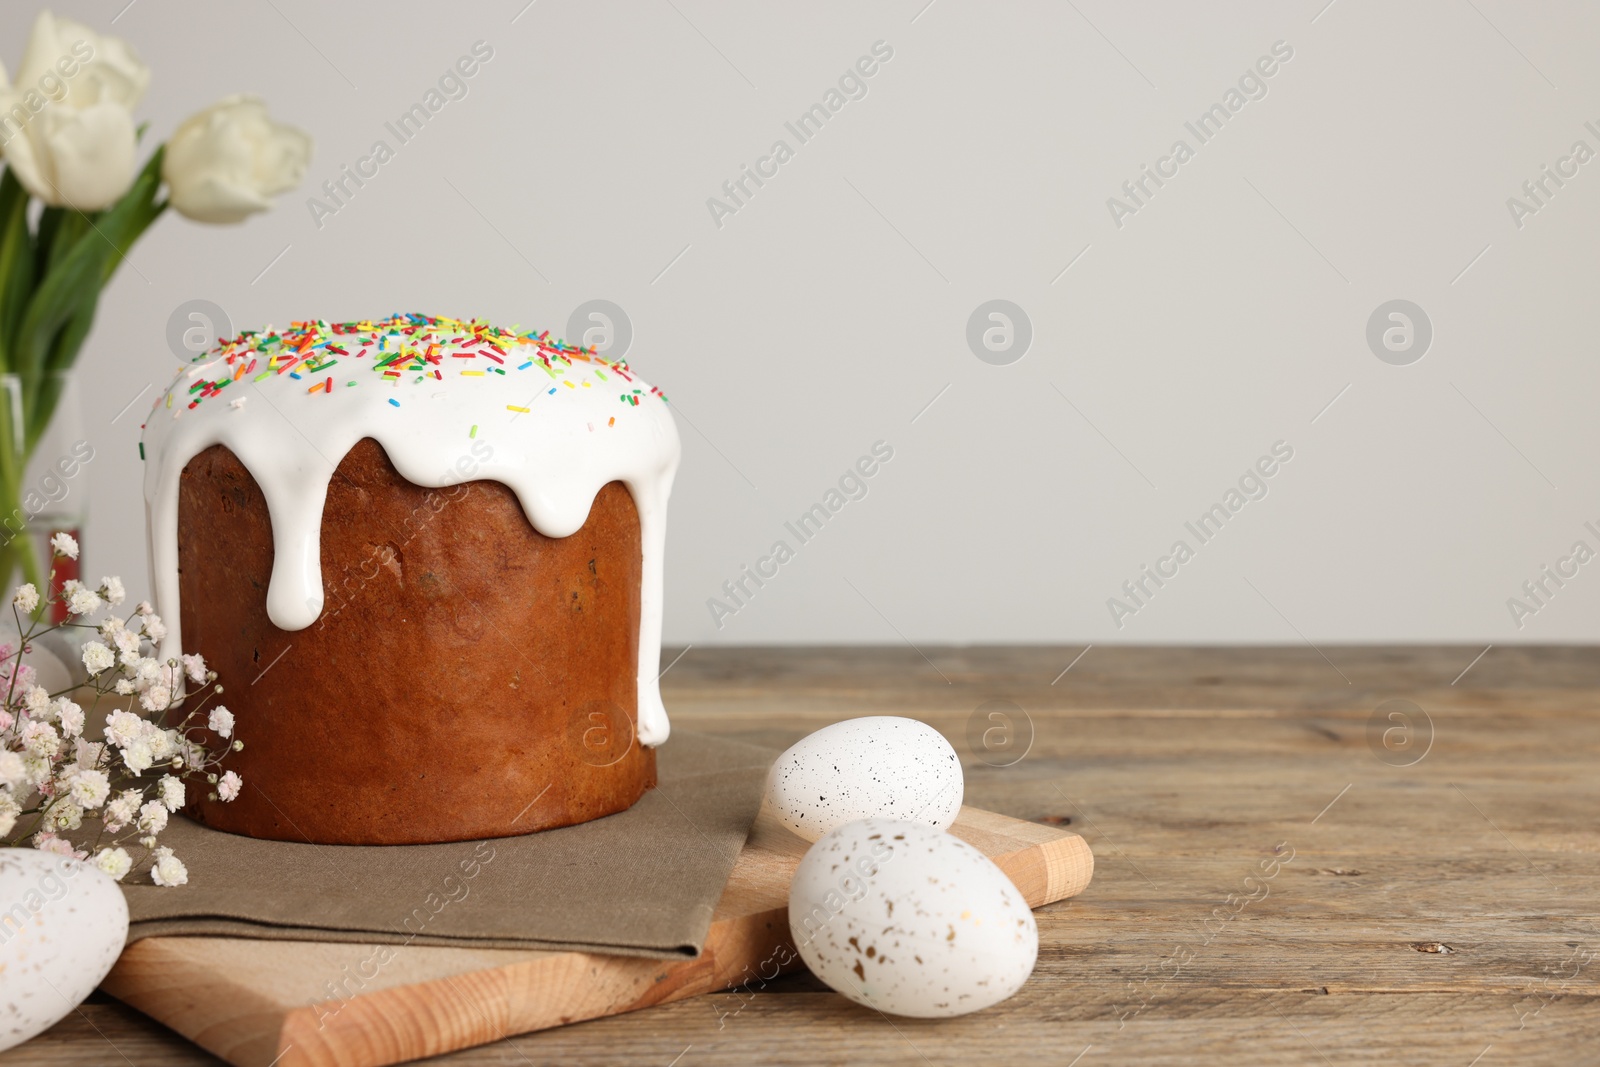 Photo of Tasty Easter cake, decorated eggs and flowers on wooden table. Space for text